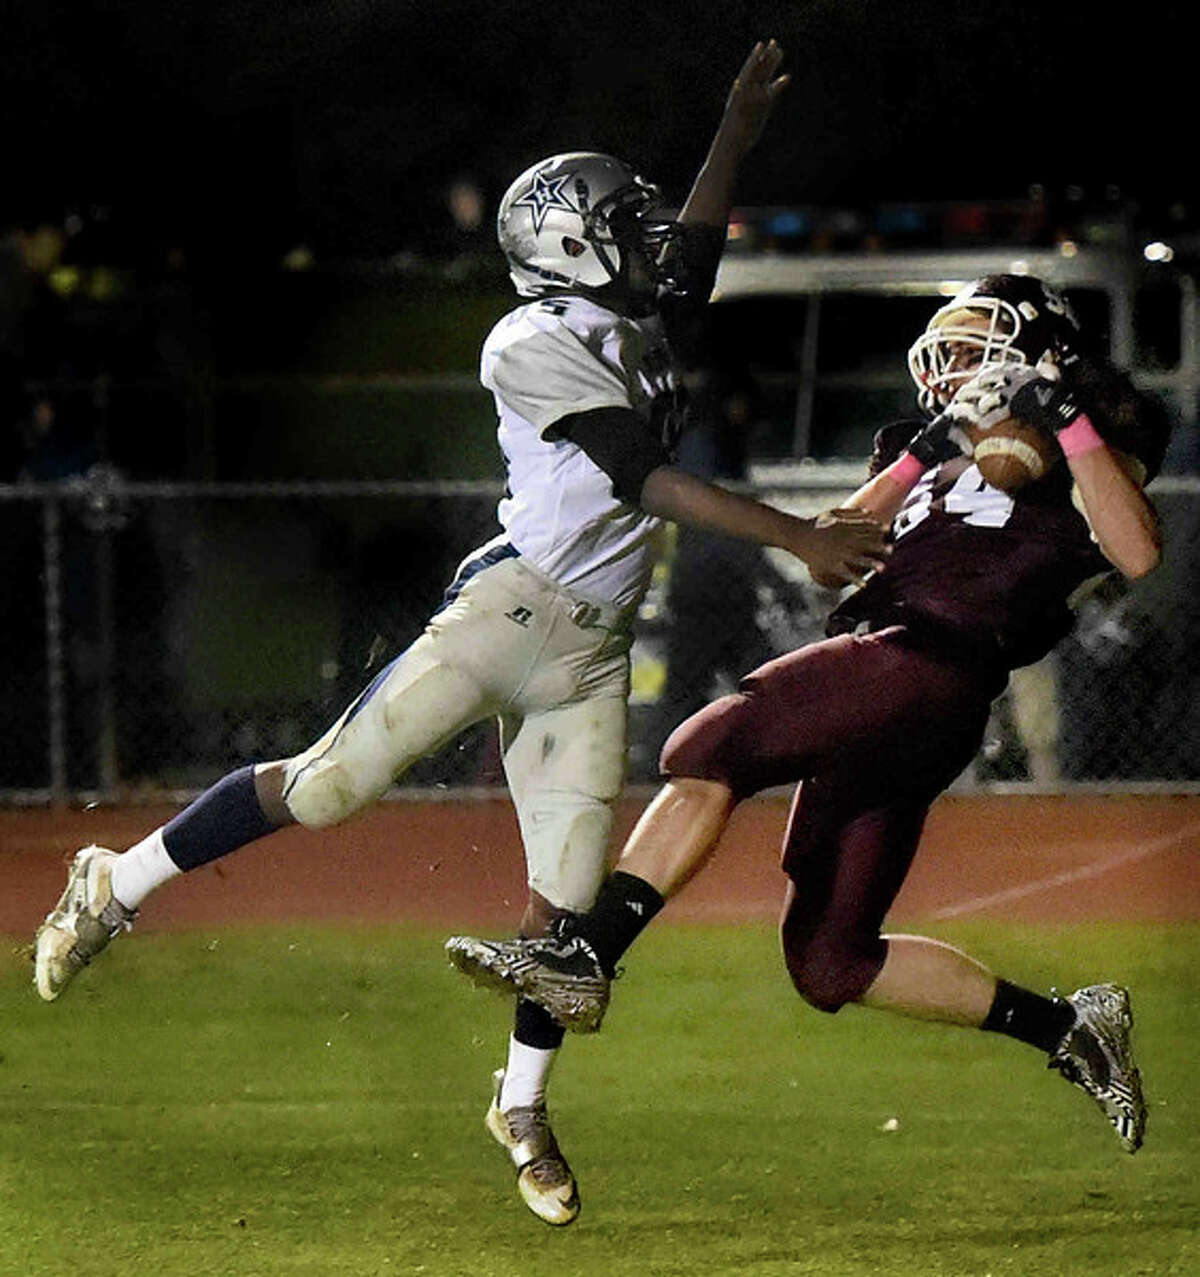 Mehdi Azizi of North Haven High School pulls in touchdown pass, right, over Gabriel Abdul-Karim of Hillhouse (Photo by Peter Hvizdak – New Haven Register)